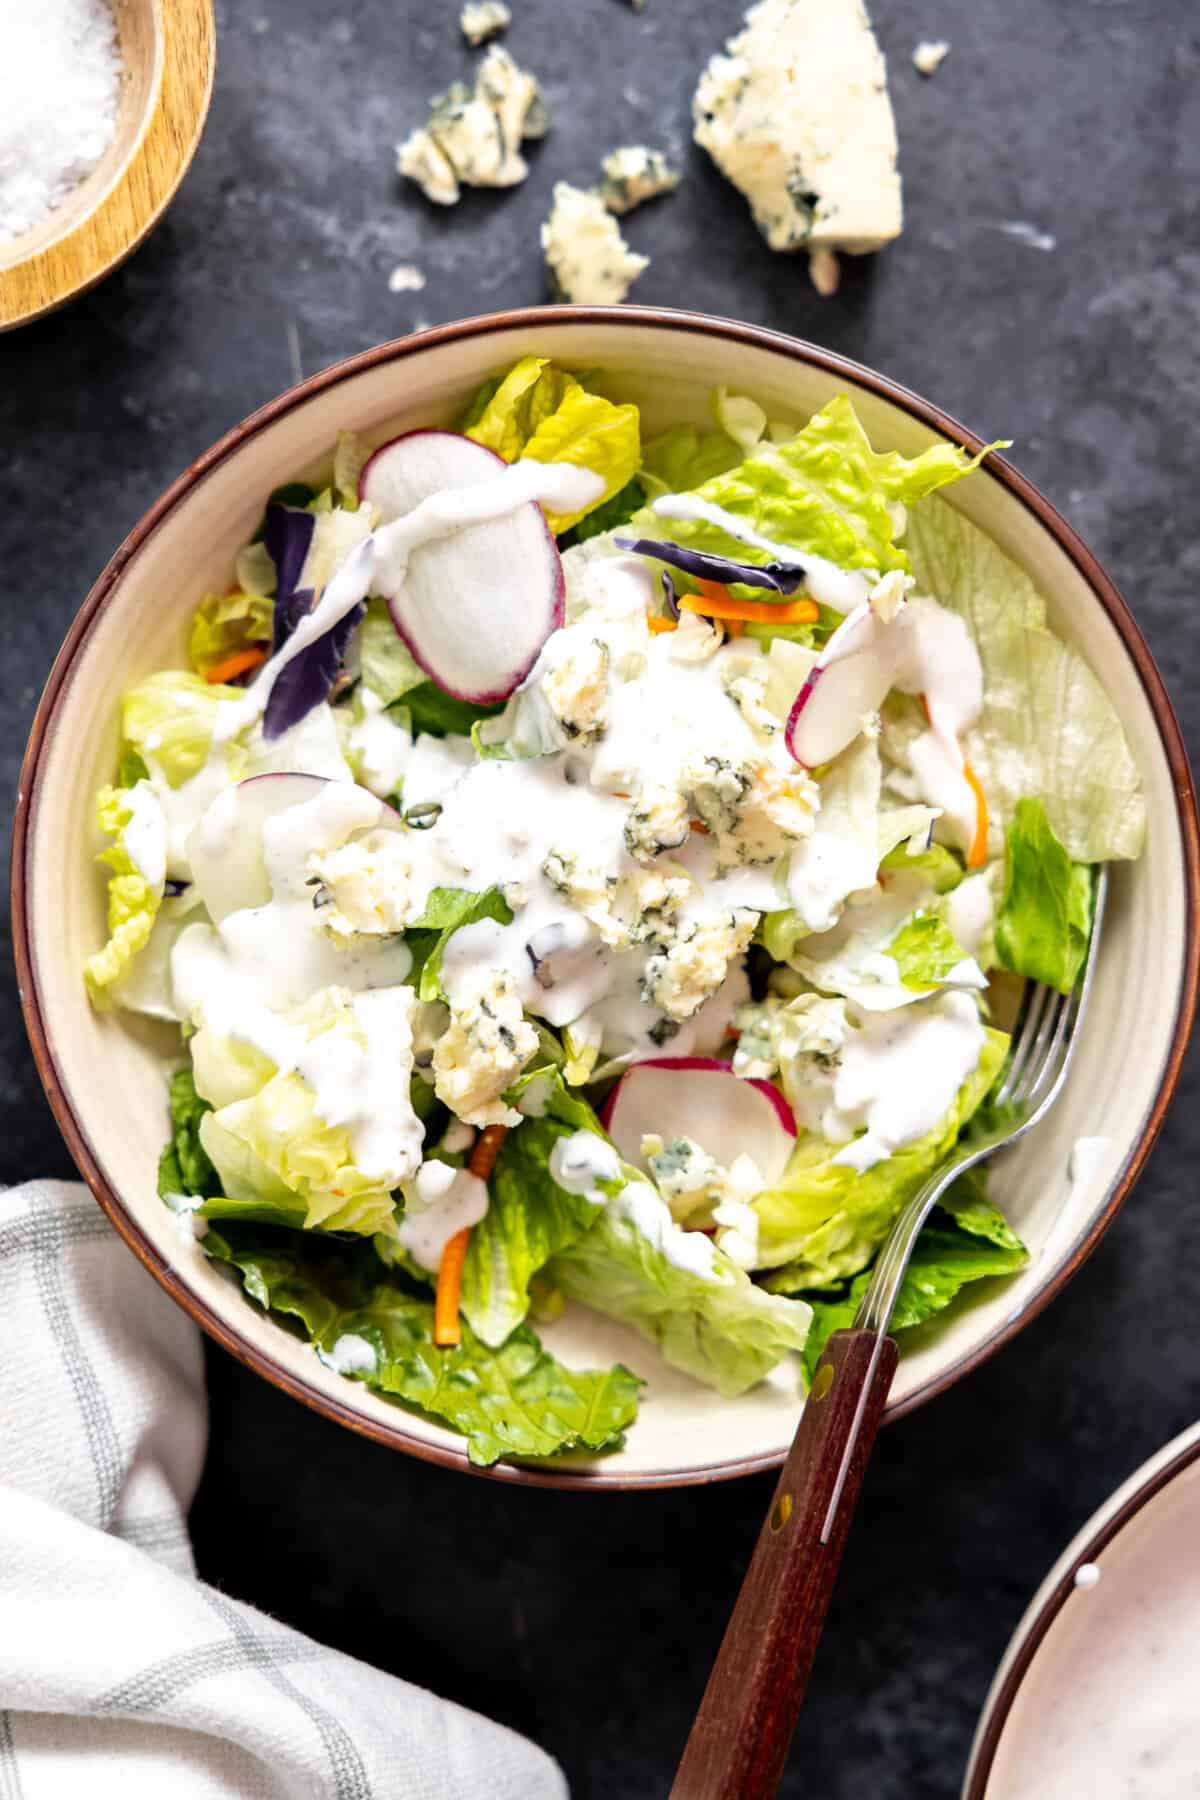 House salad topped with blue cheese dressing.